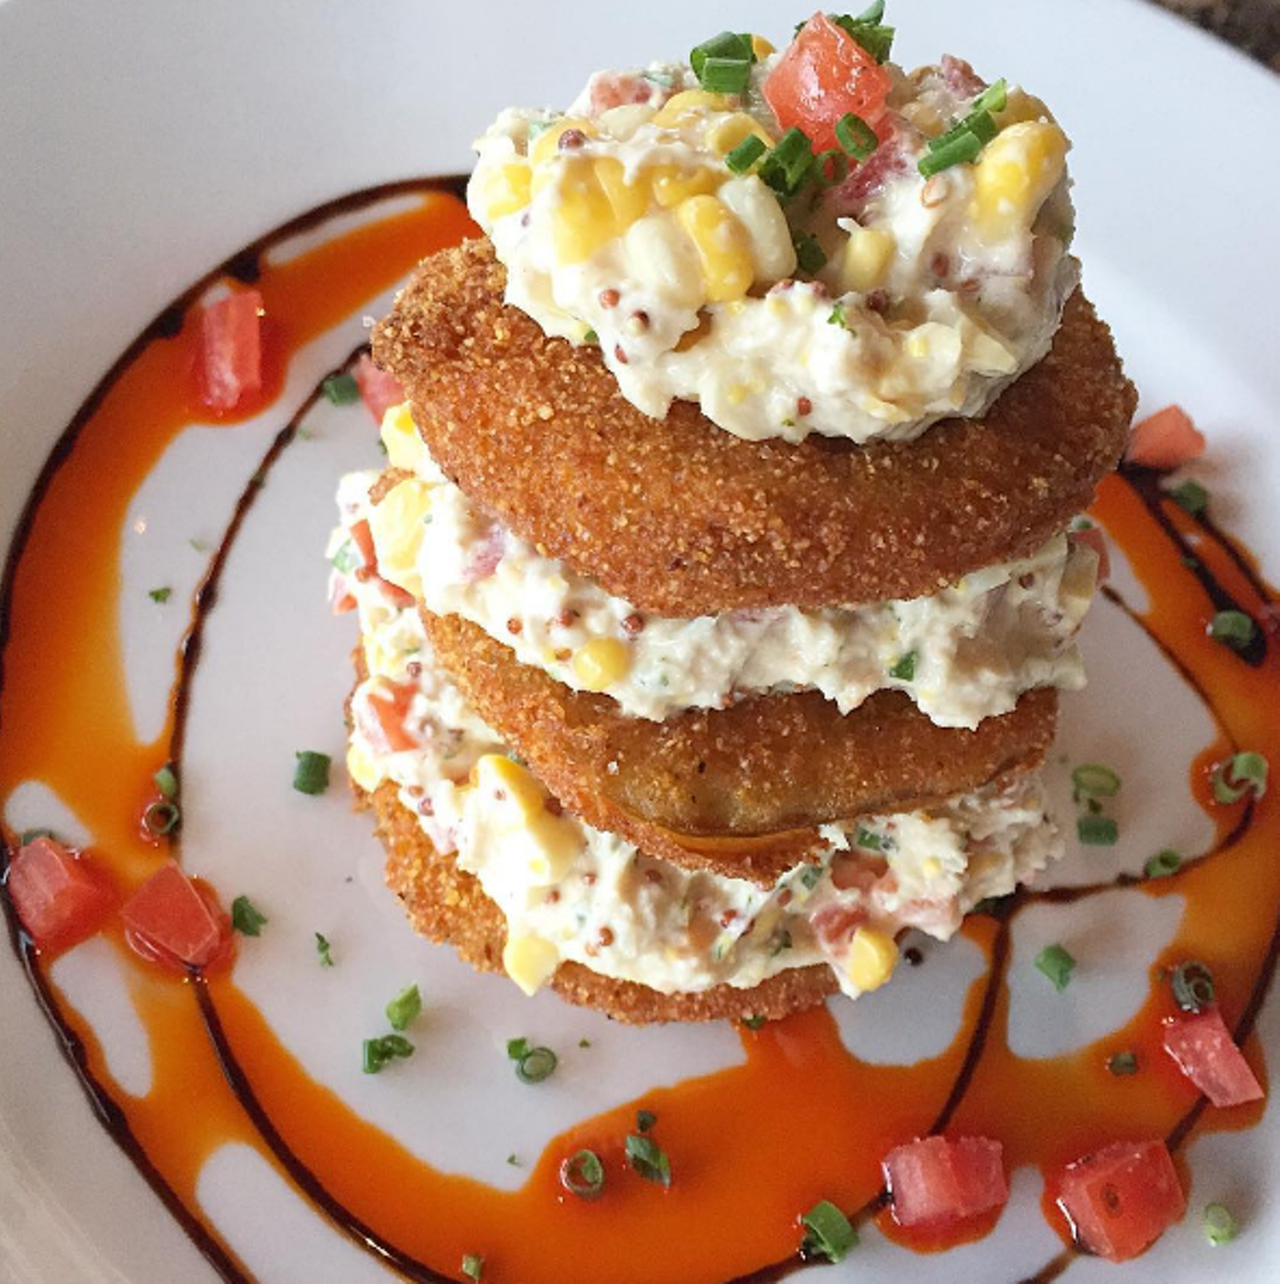 Fried green tomato at K Restaurant
1710 Edgewater Drive, 407-872-2332
This southern staple is topped with sweet yellow corn and crab salad, with a whole-grain mustard dressing to tie the components together.
Photo via bitemeorlando/Instagram